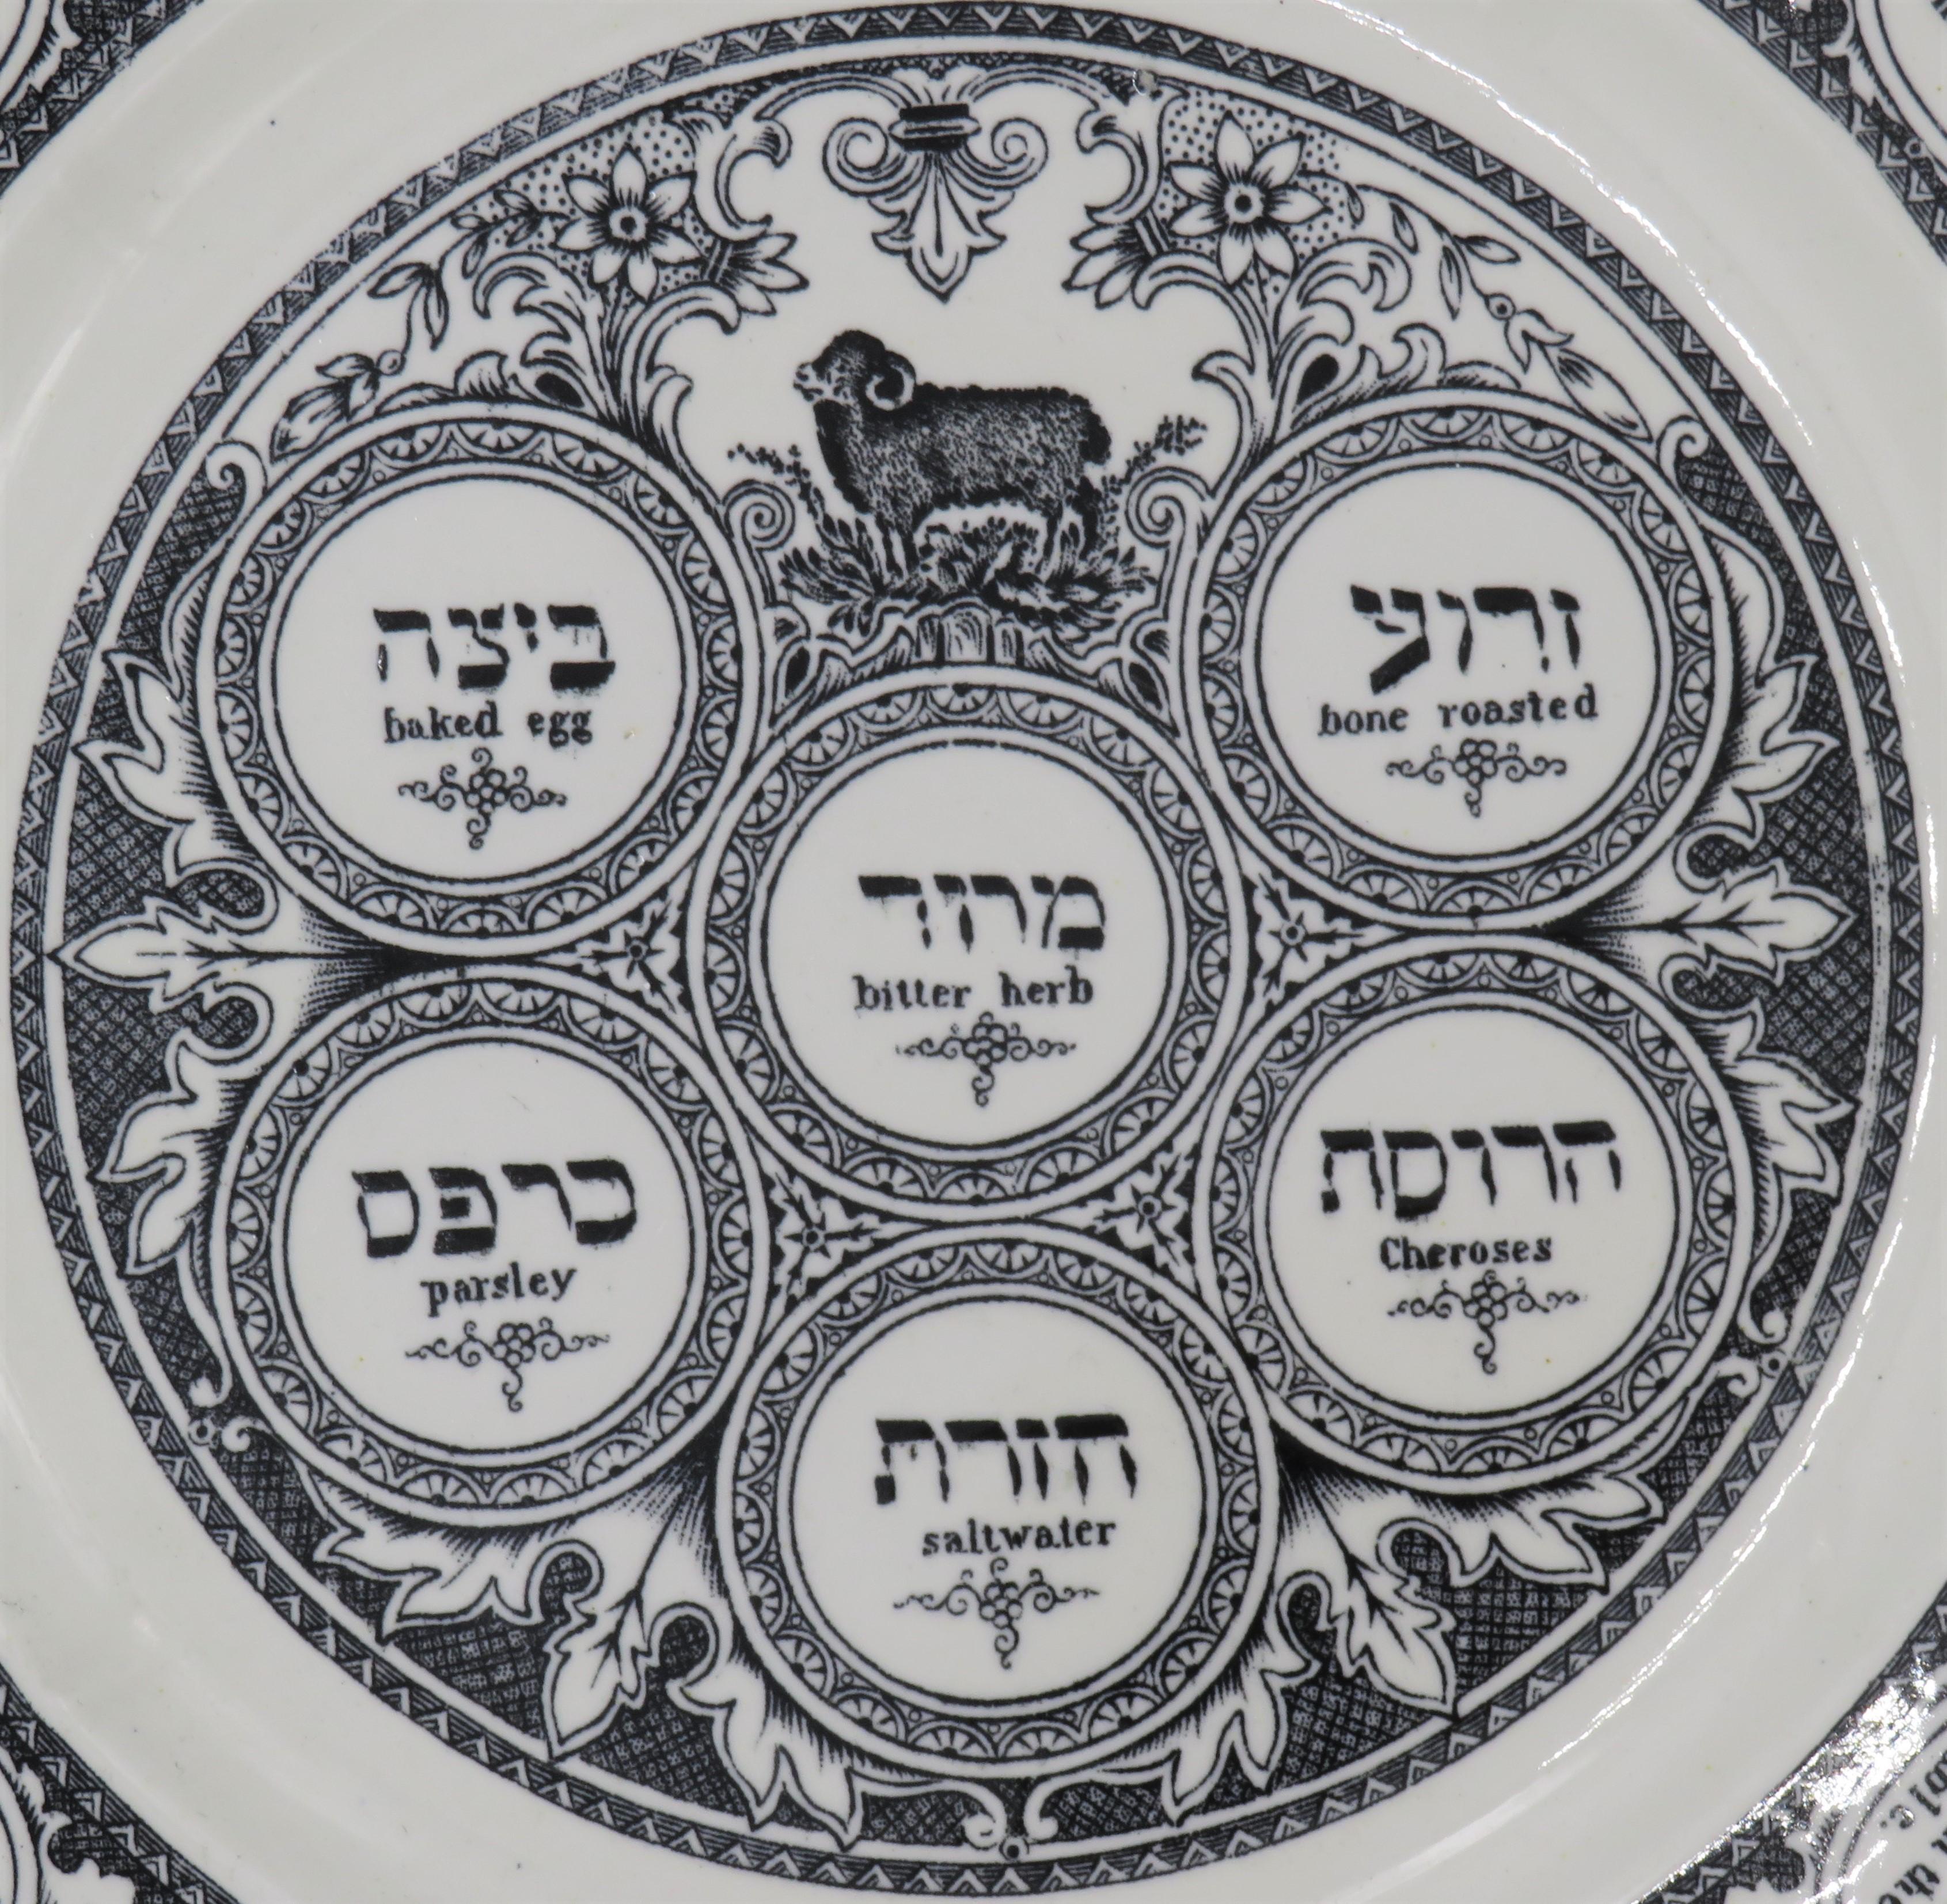 Black and white pottery Passover plate, by Ridgeways, Staffordshire, England, circa 1850.
In the manner of a traditional Seder plate for Pesach or Passover, decorated with the image of a pascal lamb with small reserves and text in Hebrew and